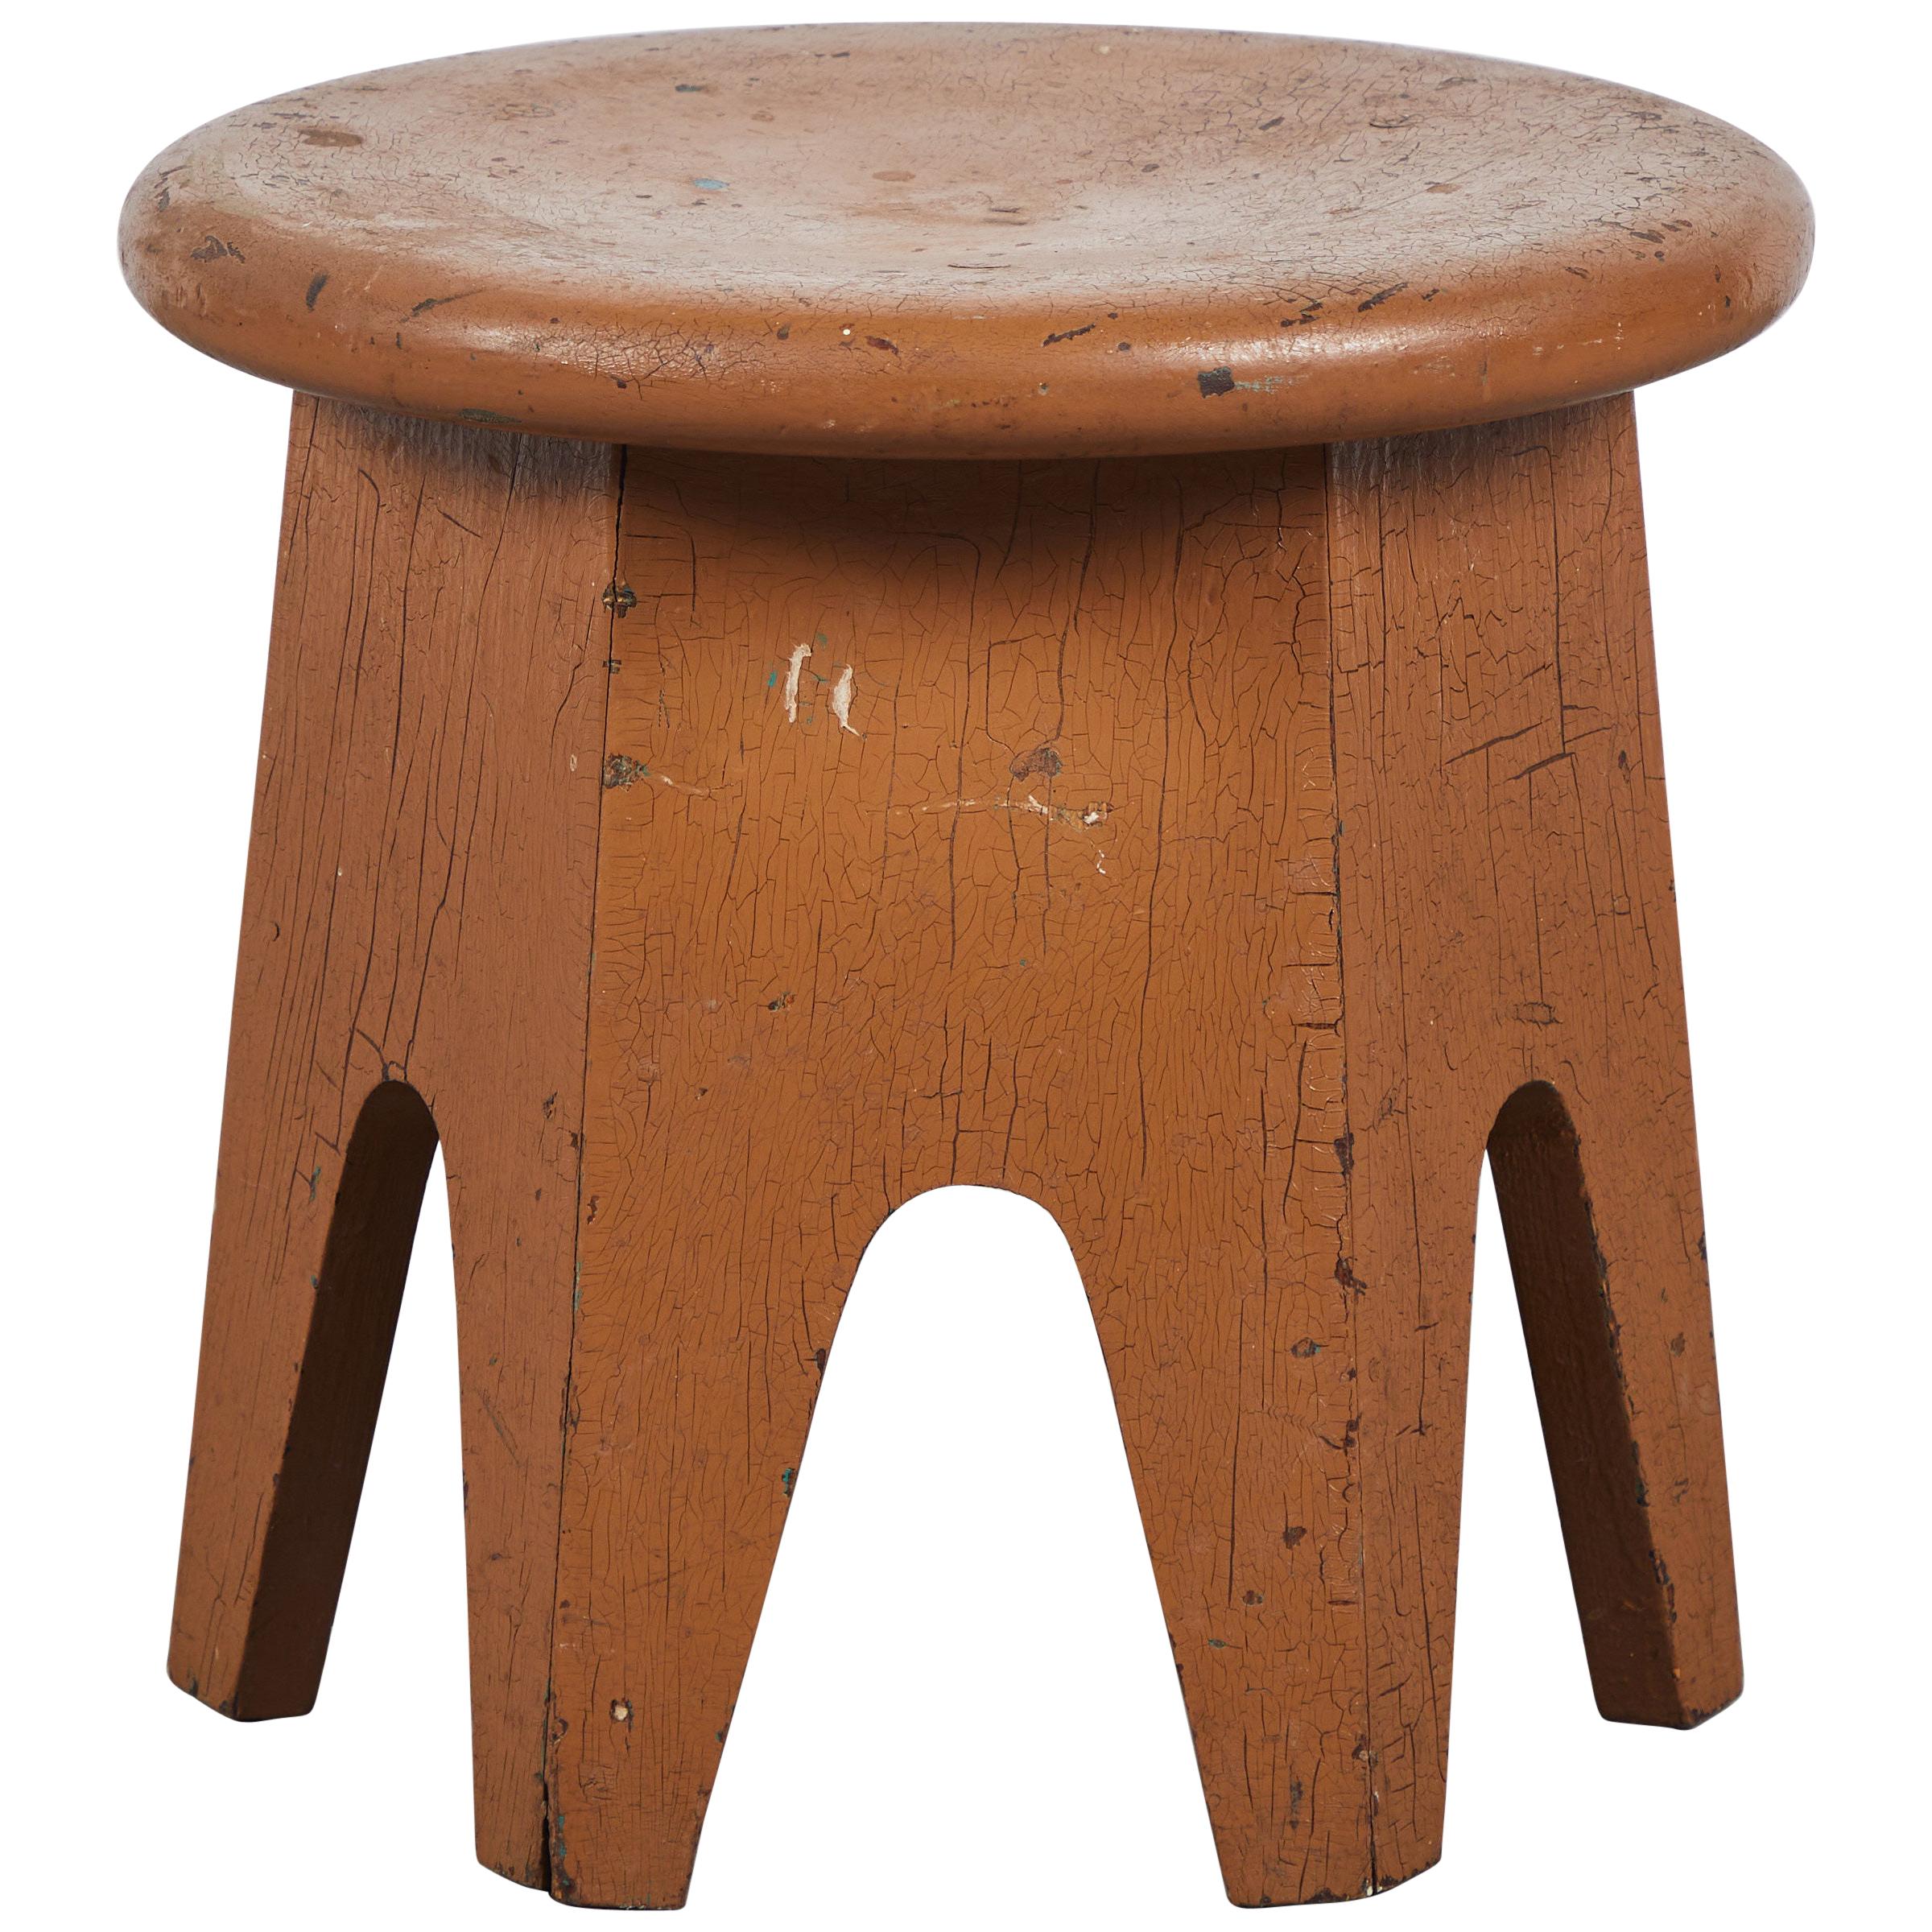 Early American Painted Stool